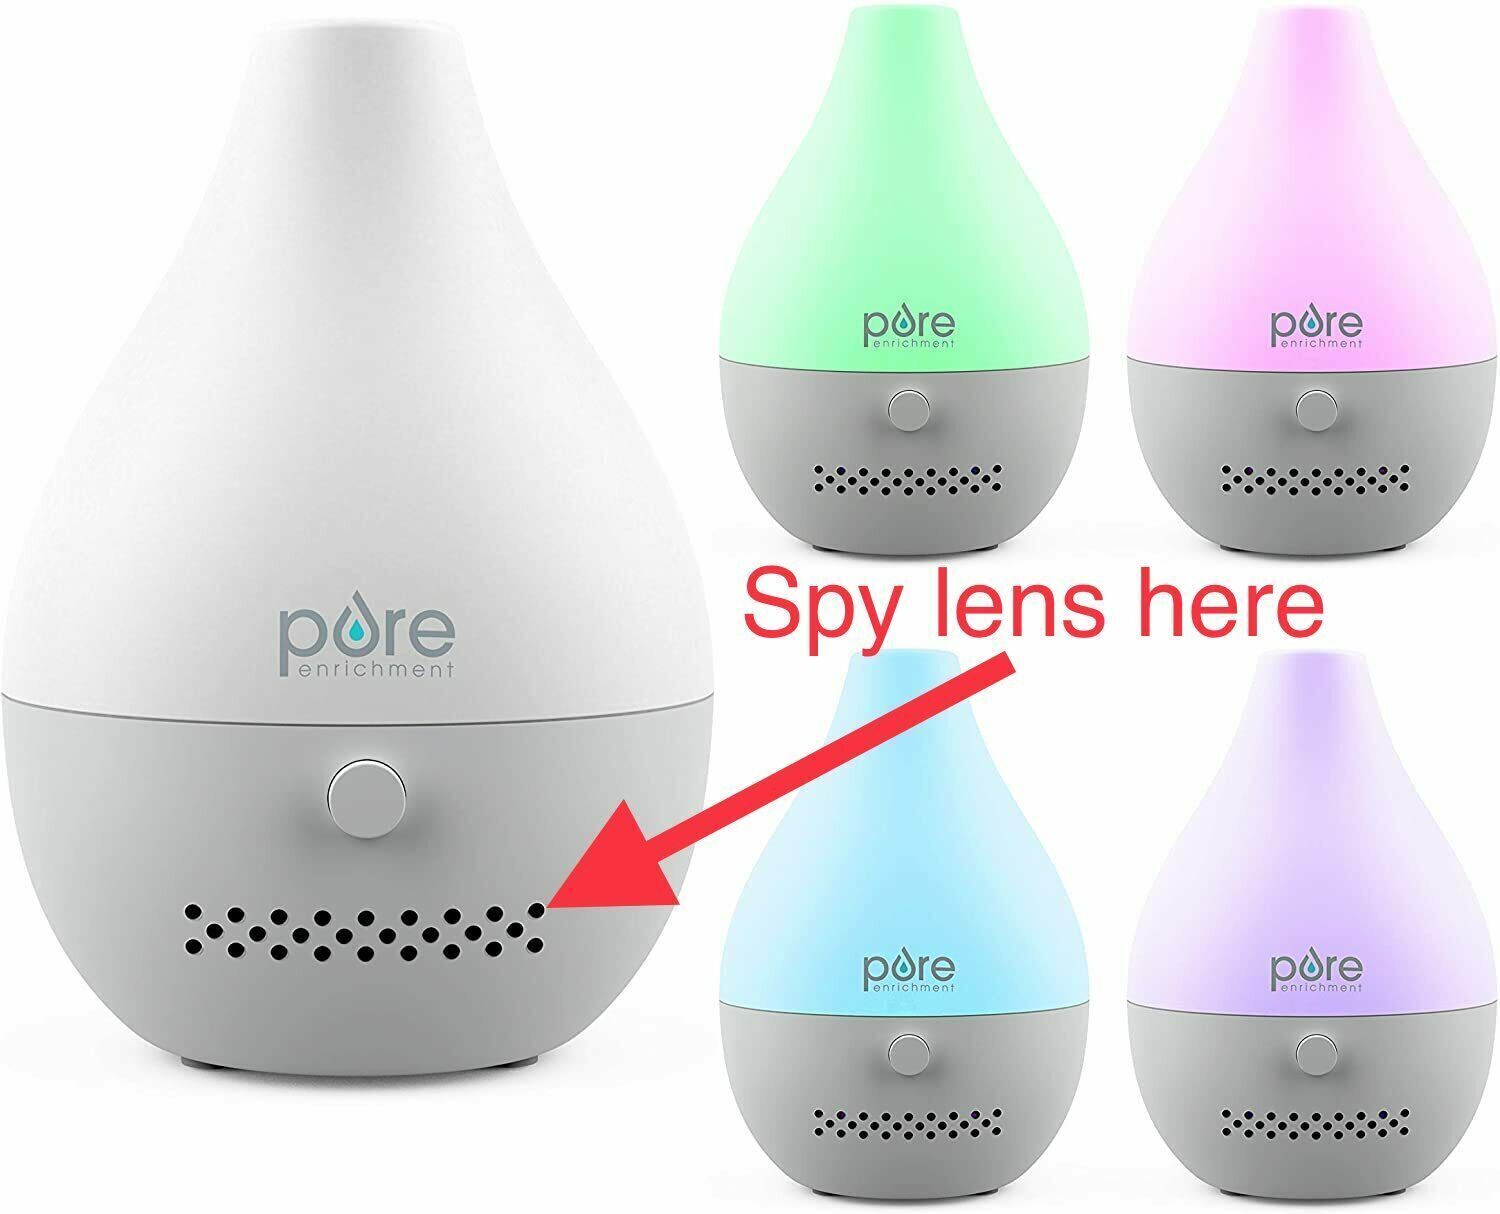 Four ultrasonic diffusers with color-changing LED lights, one marked to indicate it houses a hidden WiFi camera for home surveillance.